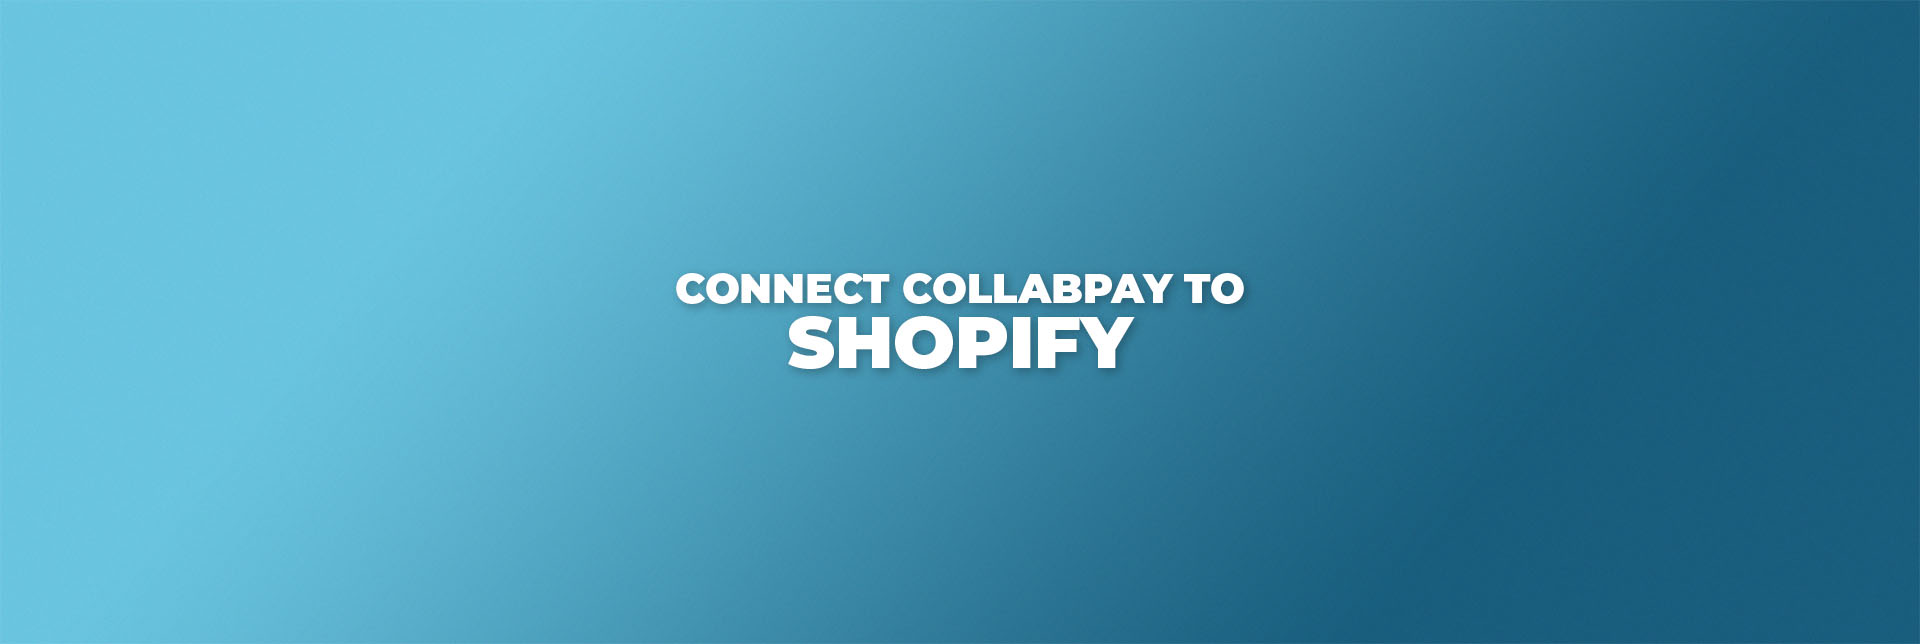 Connect Shopify